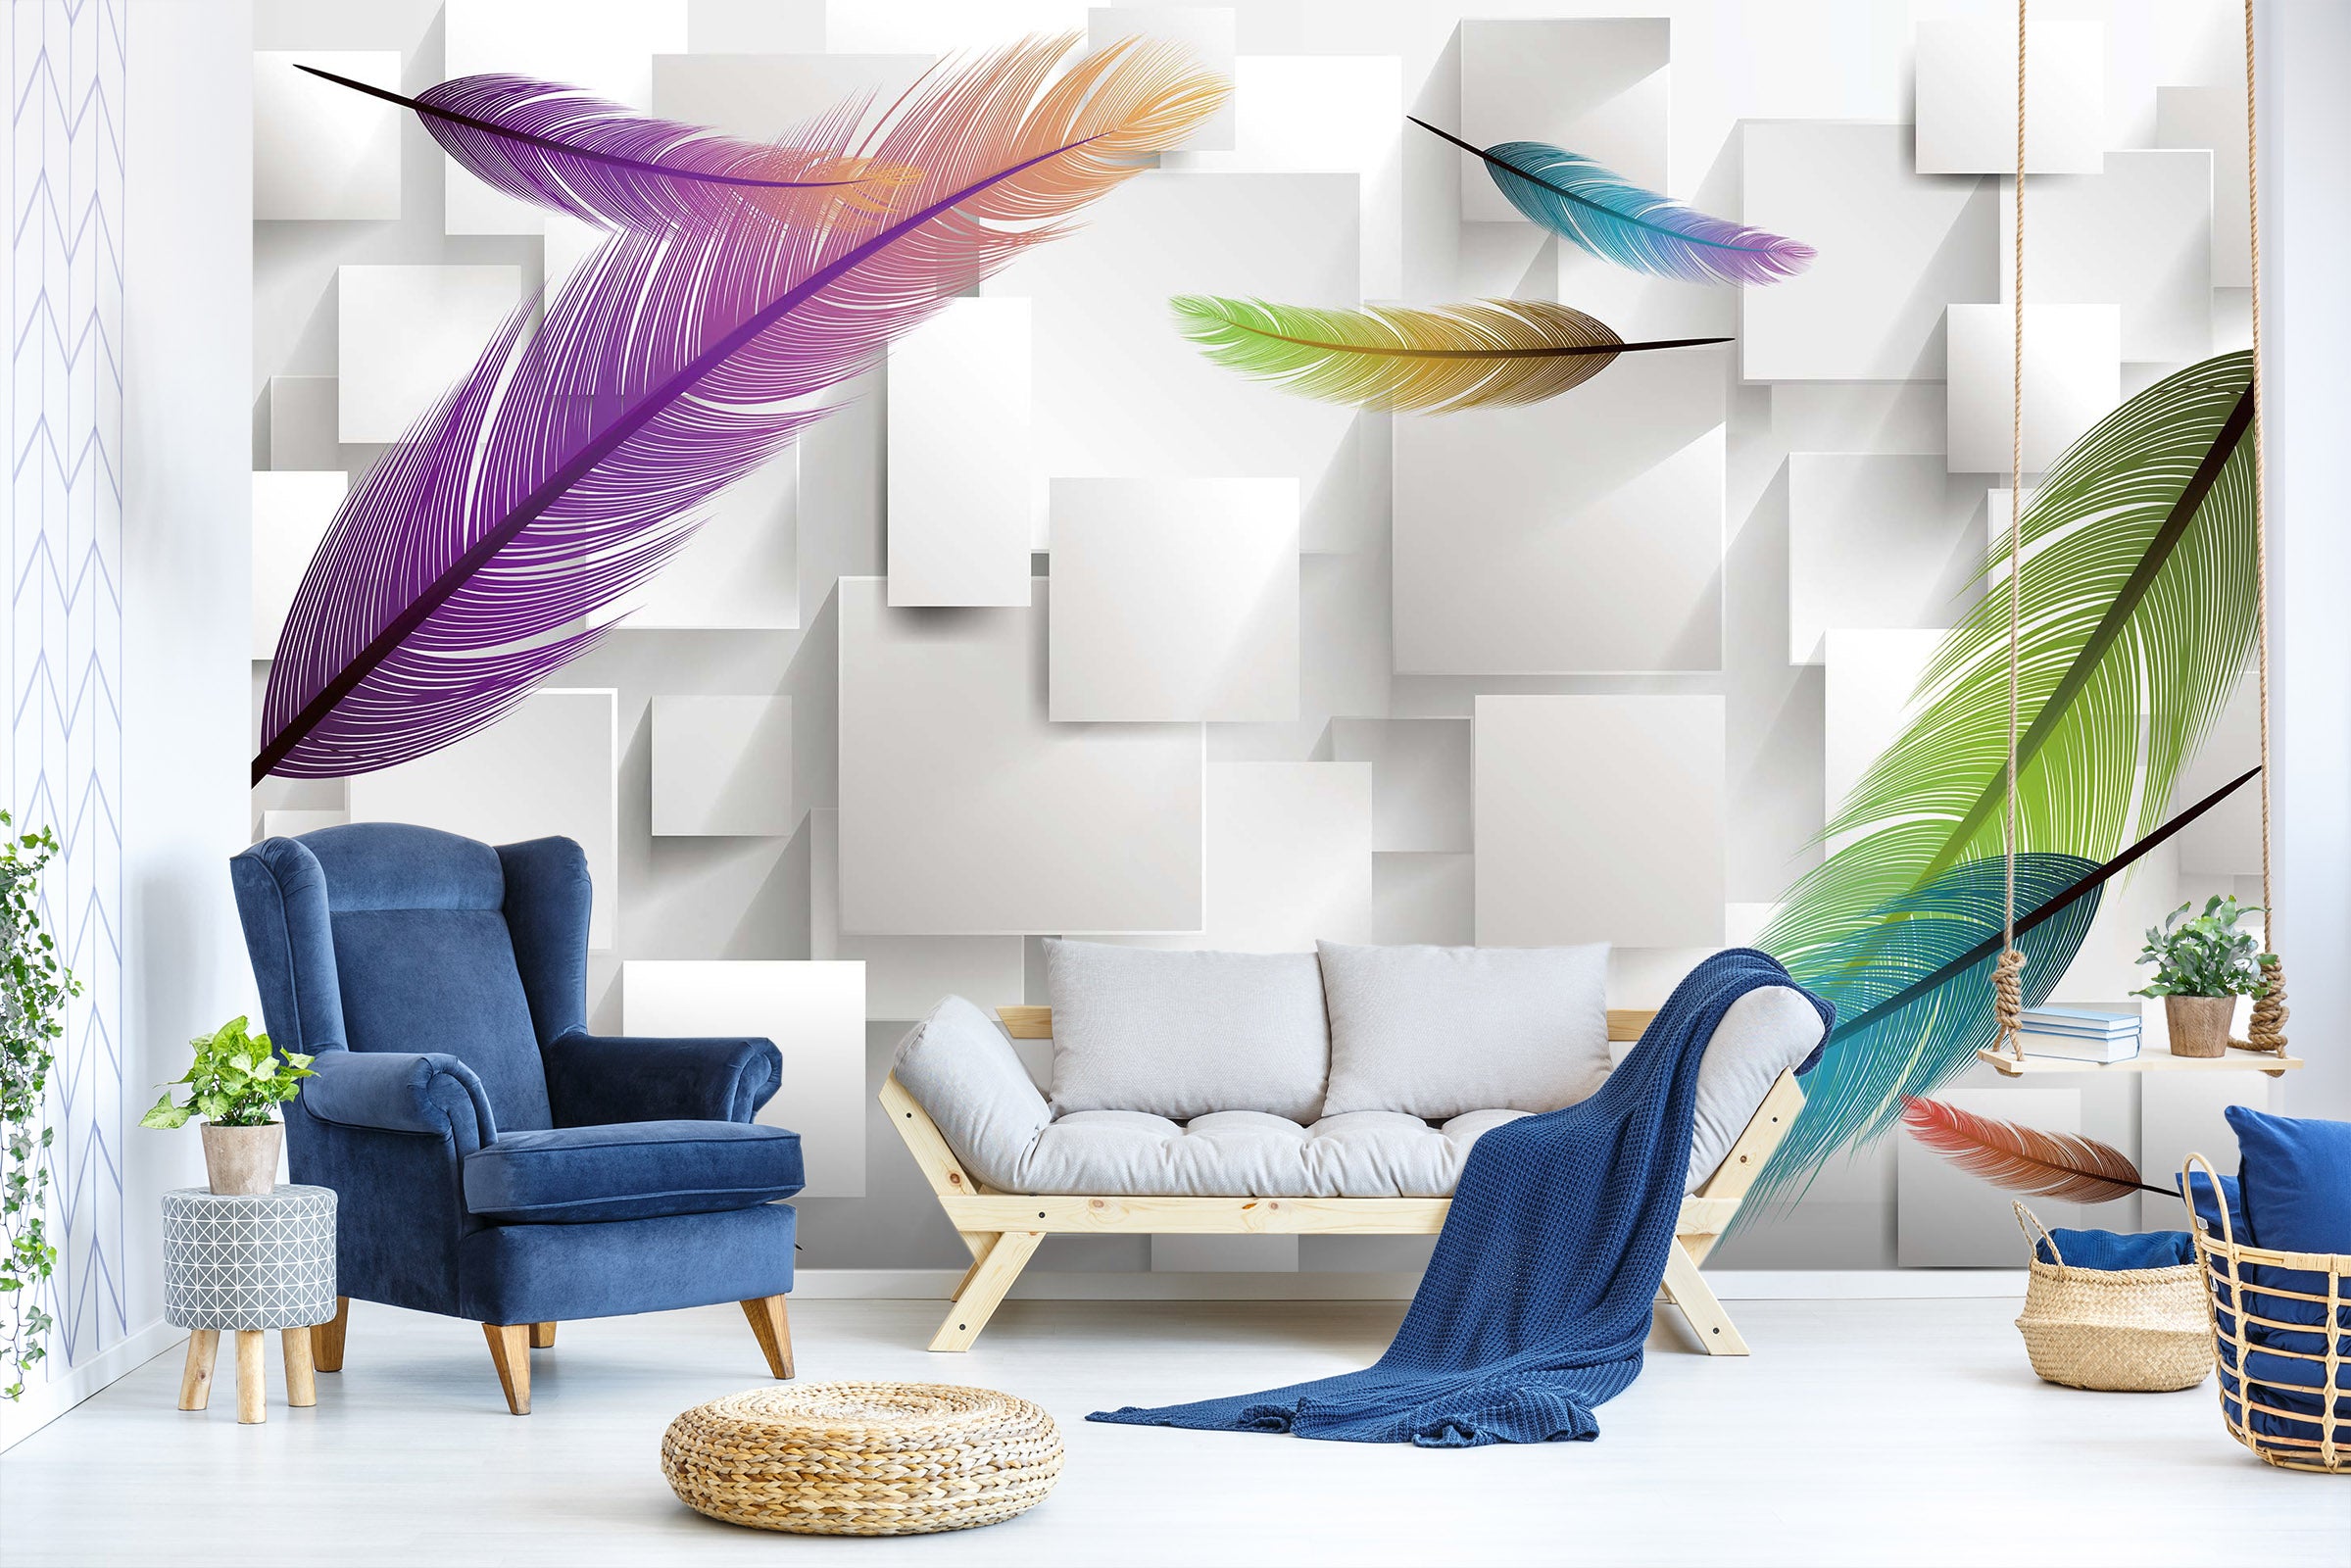 3D Colored Feathers 1402 Wall Murals